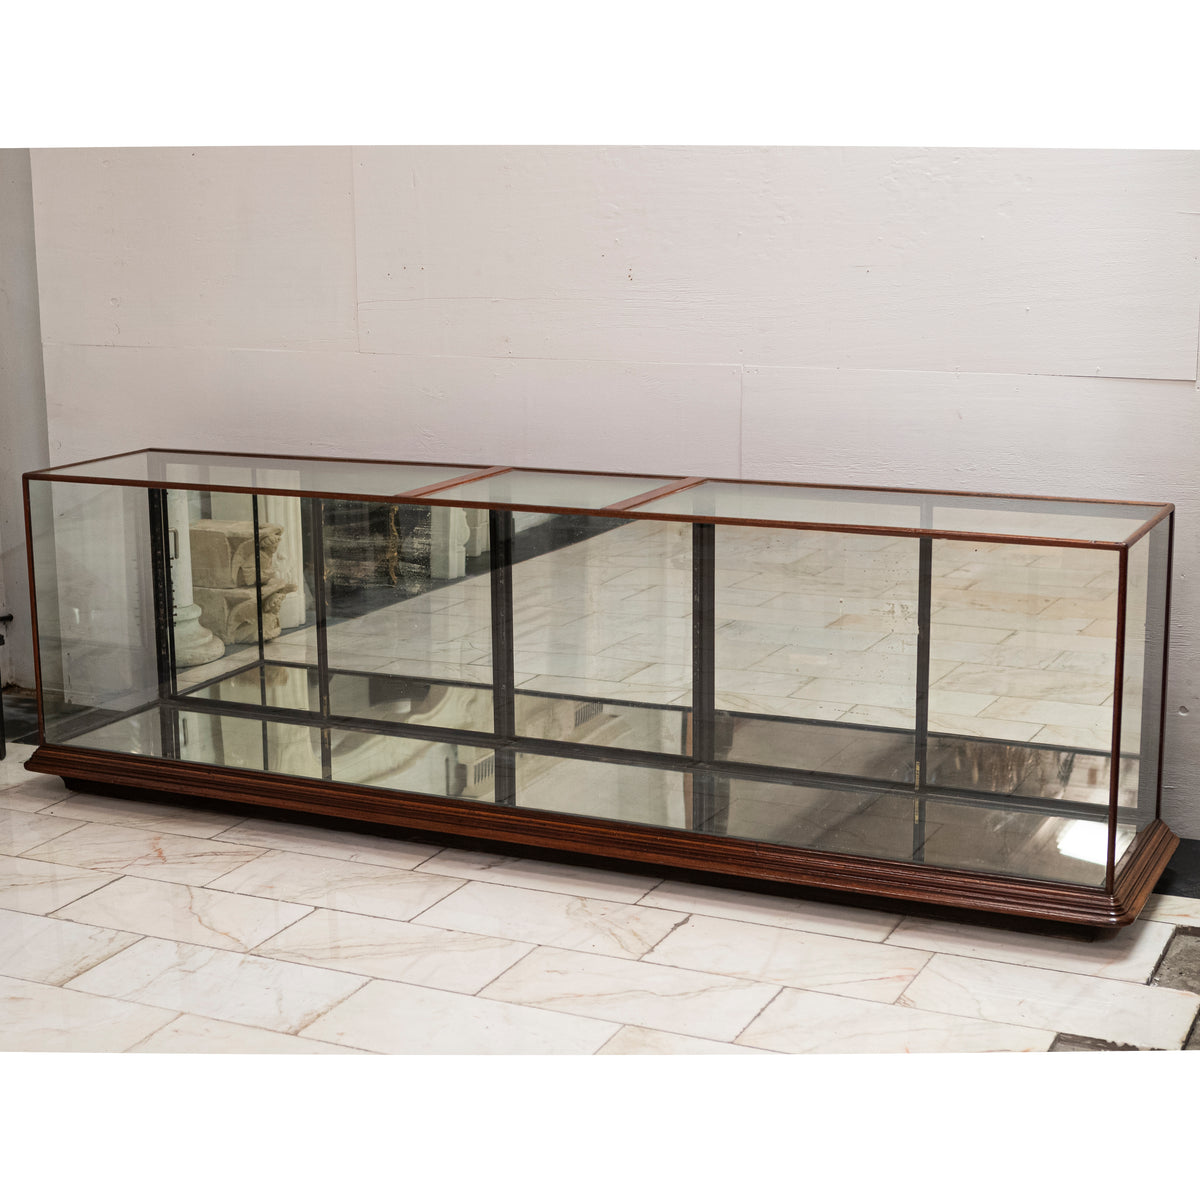 Antique Victorian Mahogany Shop Counter | Display Cabinet | The Architectural Forum